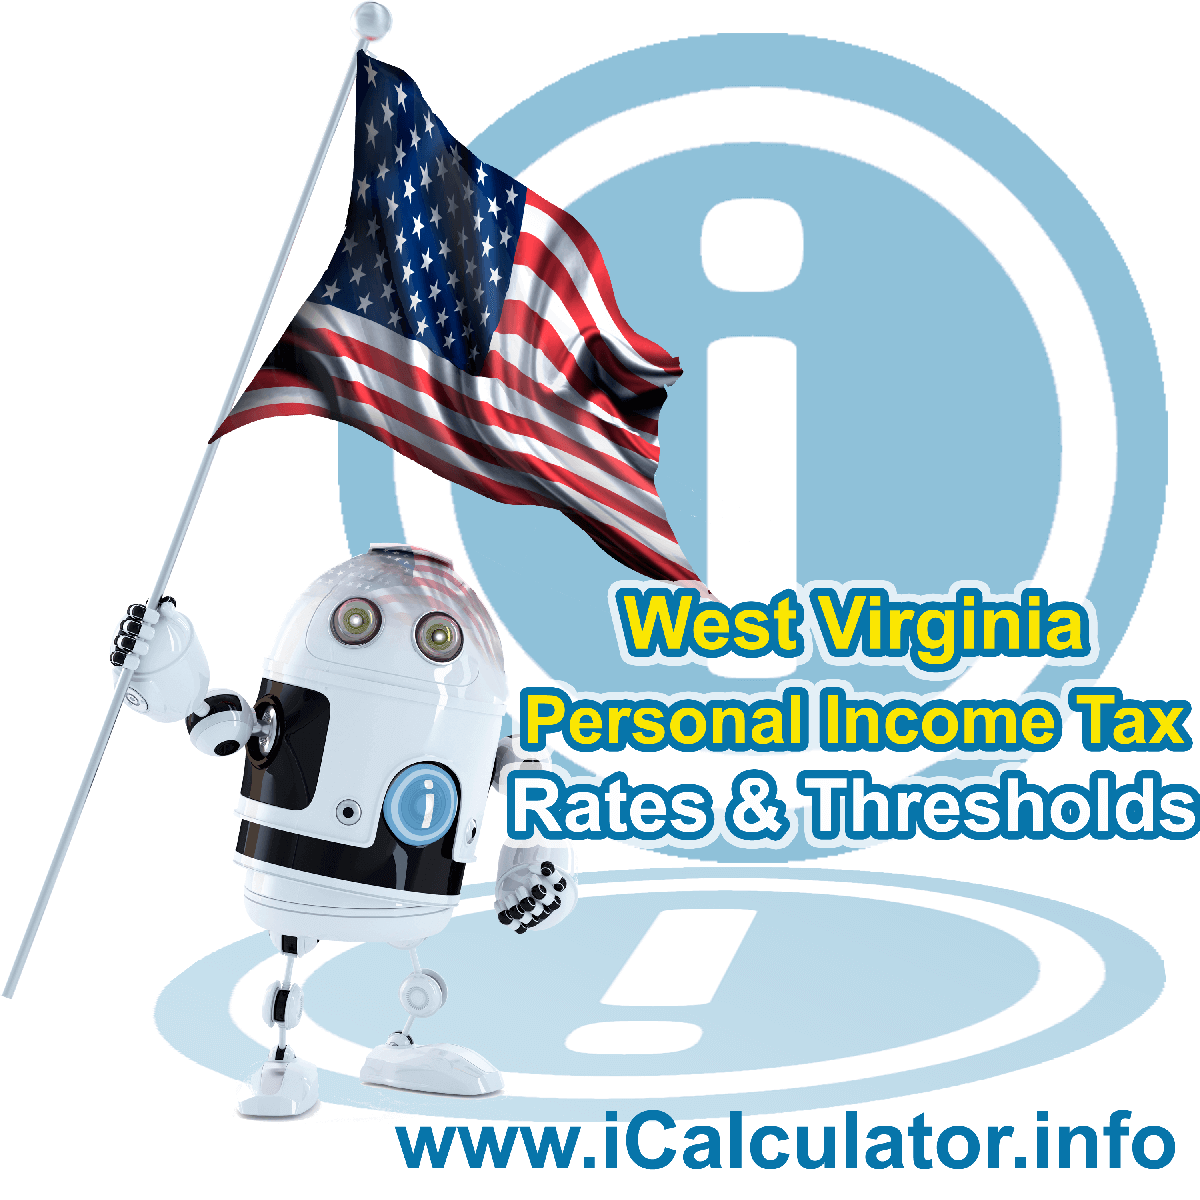 West Virginia State Tax Tables 2013. This image displays details of the West Virginia State Tax Tables for the 2013 tax return year which is provided in support of the 2013 US Tax Calculator